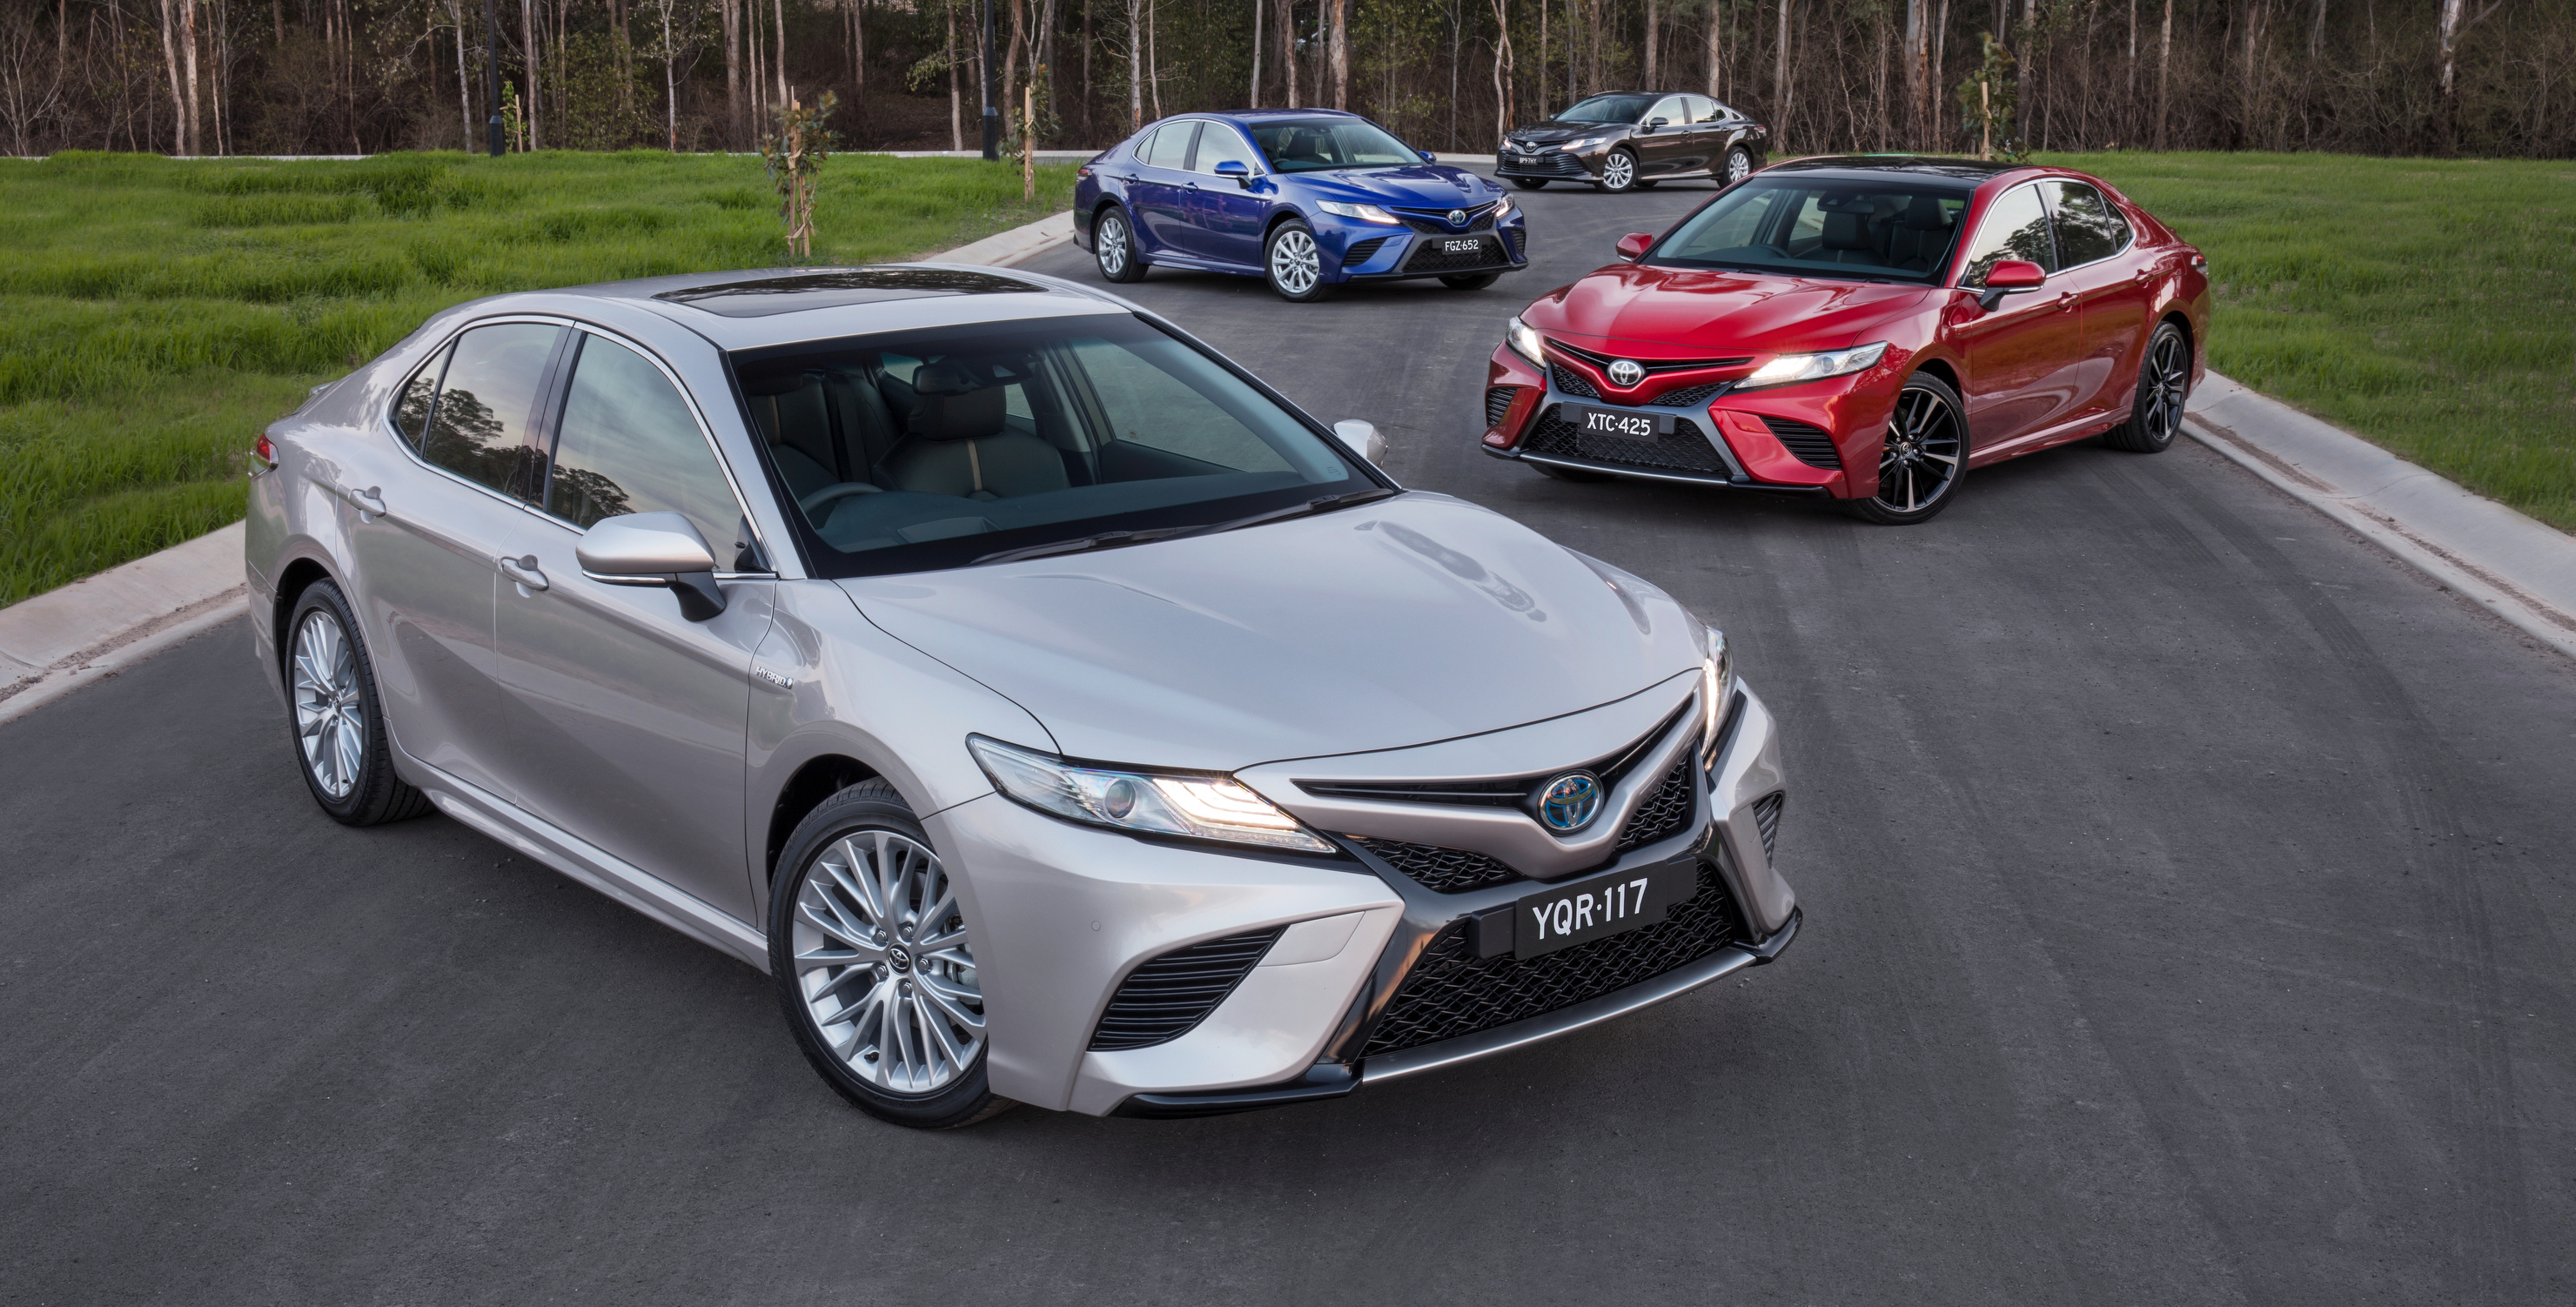 2018 Toyota Camry pricing and specs - Photos (1 of 31)